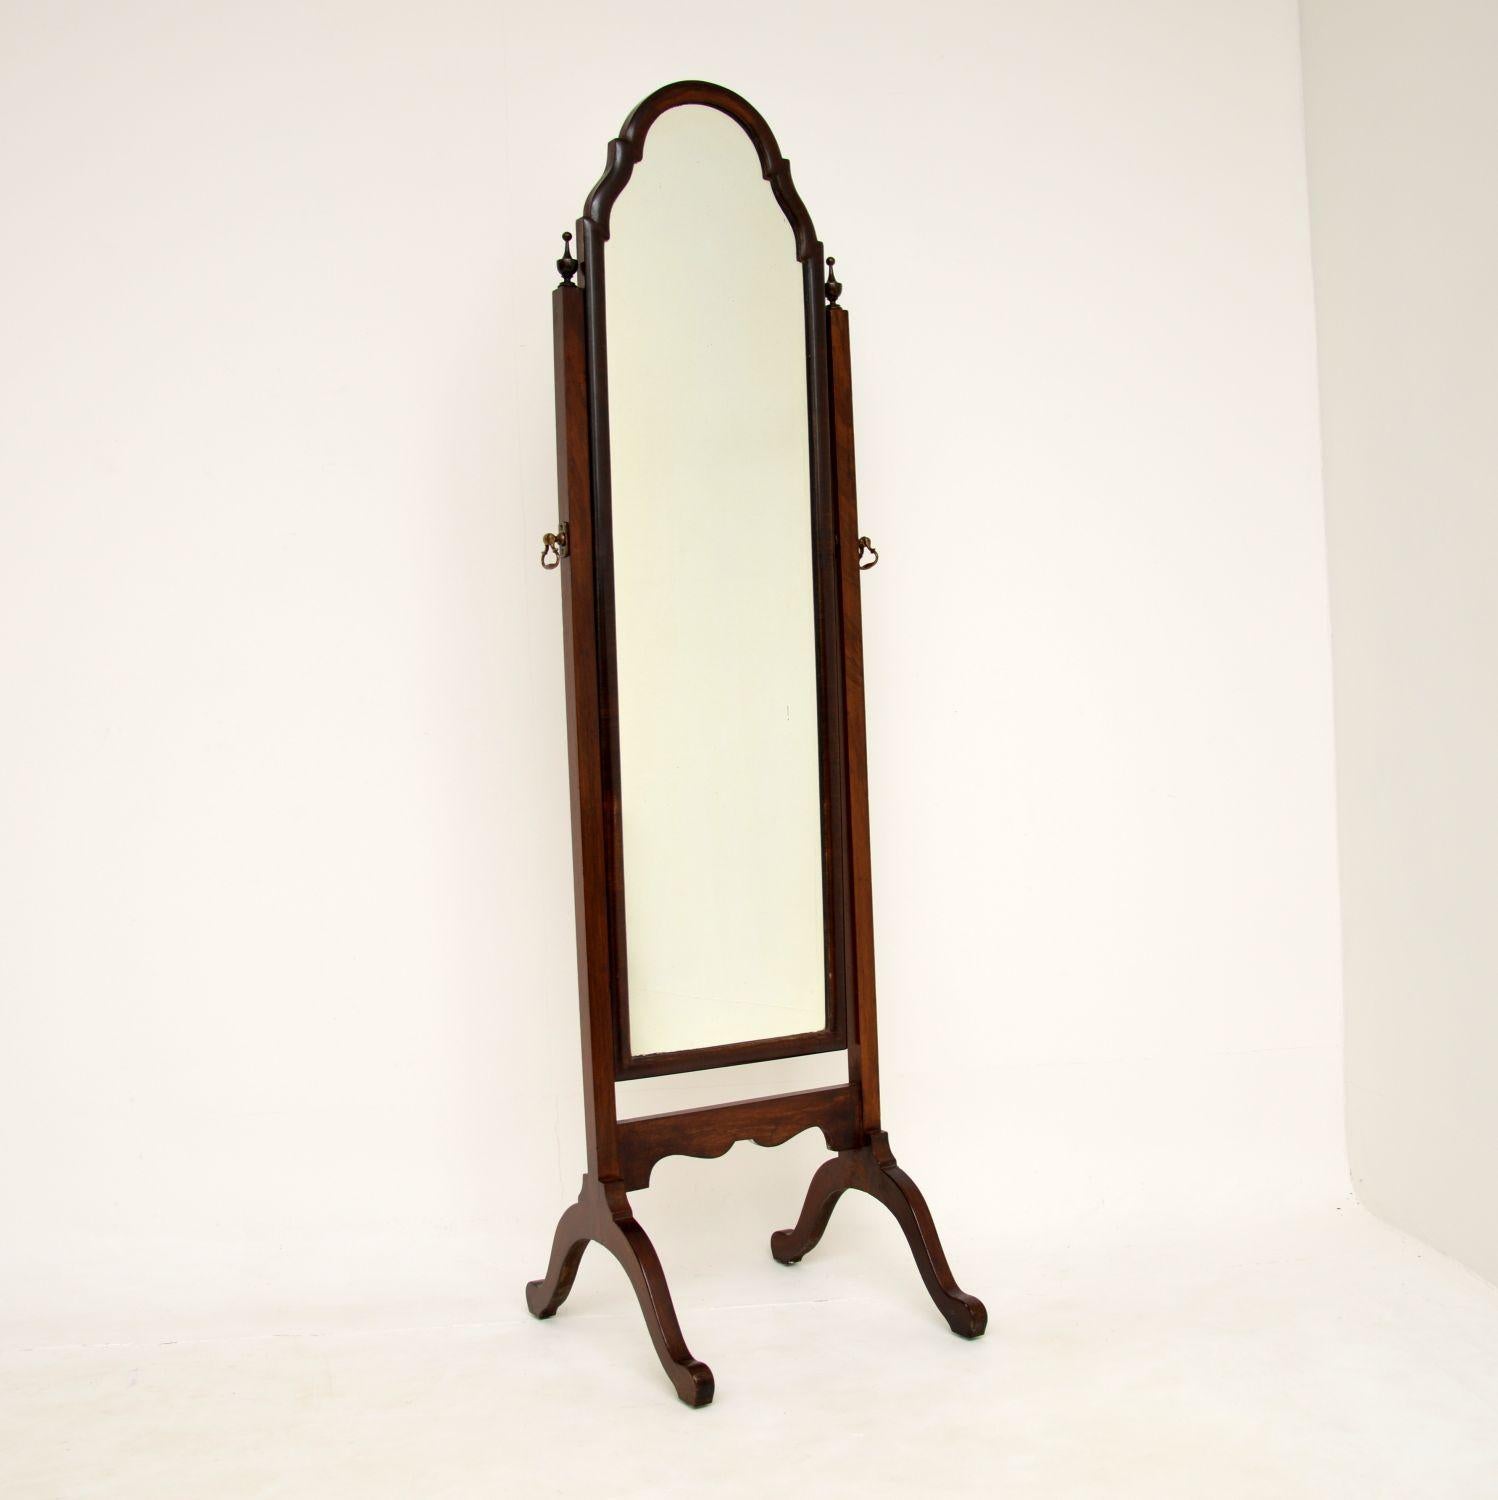 A lovely original antique cheval mirror in walnut. This was made in England, it dates from around 1900-1920.

It has a beautiful design and is of great quality. The mirror is fairly slim, with a domed top at the frame and turned finials at the top